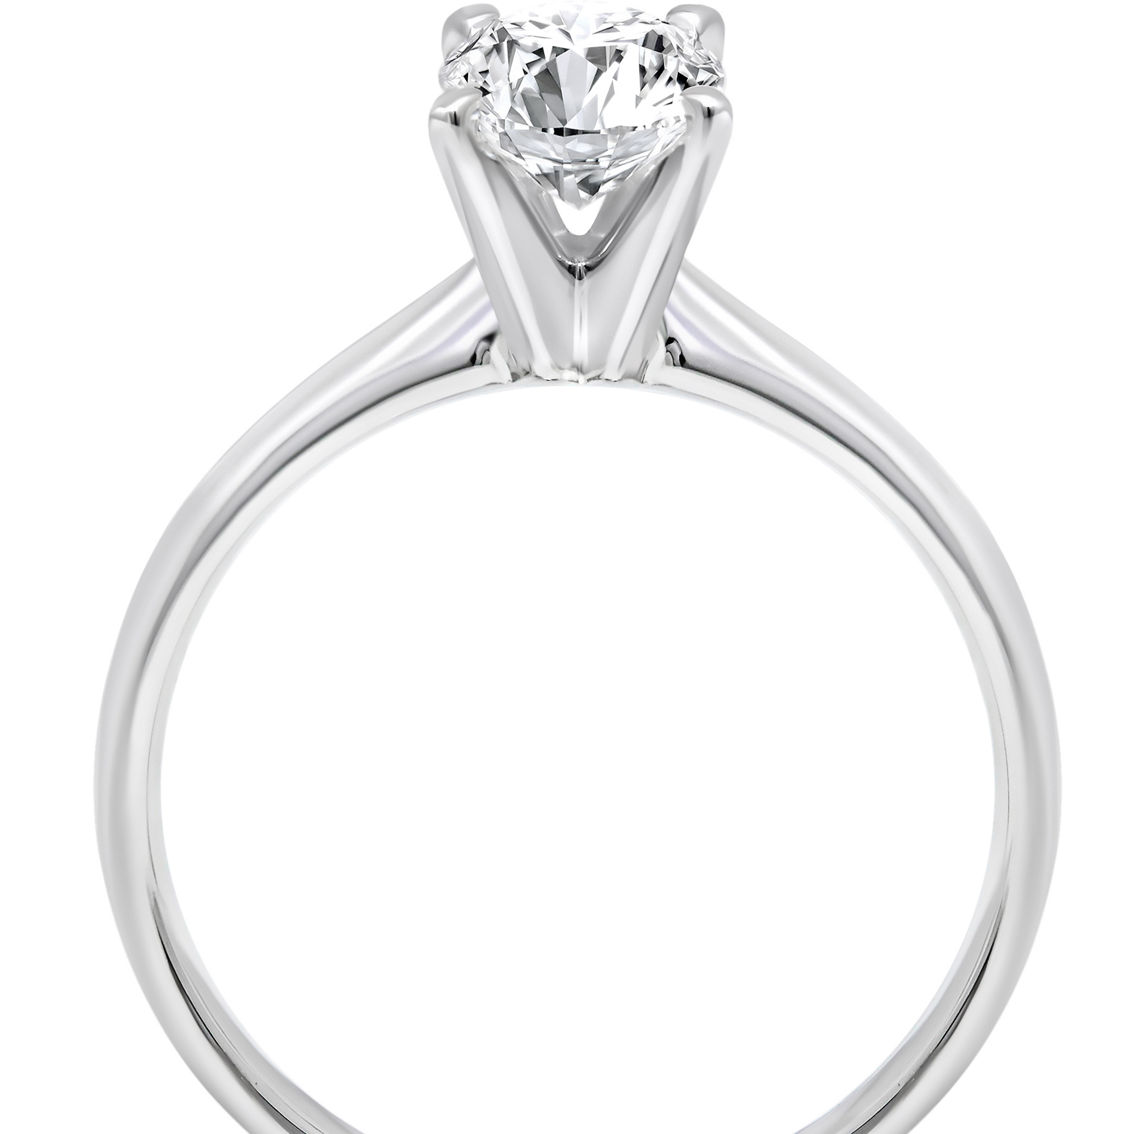 Ray of Brilliance 14K White Gold 1 1/2 CTW Lab Grown Oval Diamond Solitaire Ring - Image 3 of 4